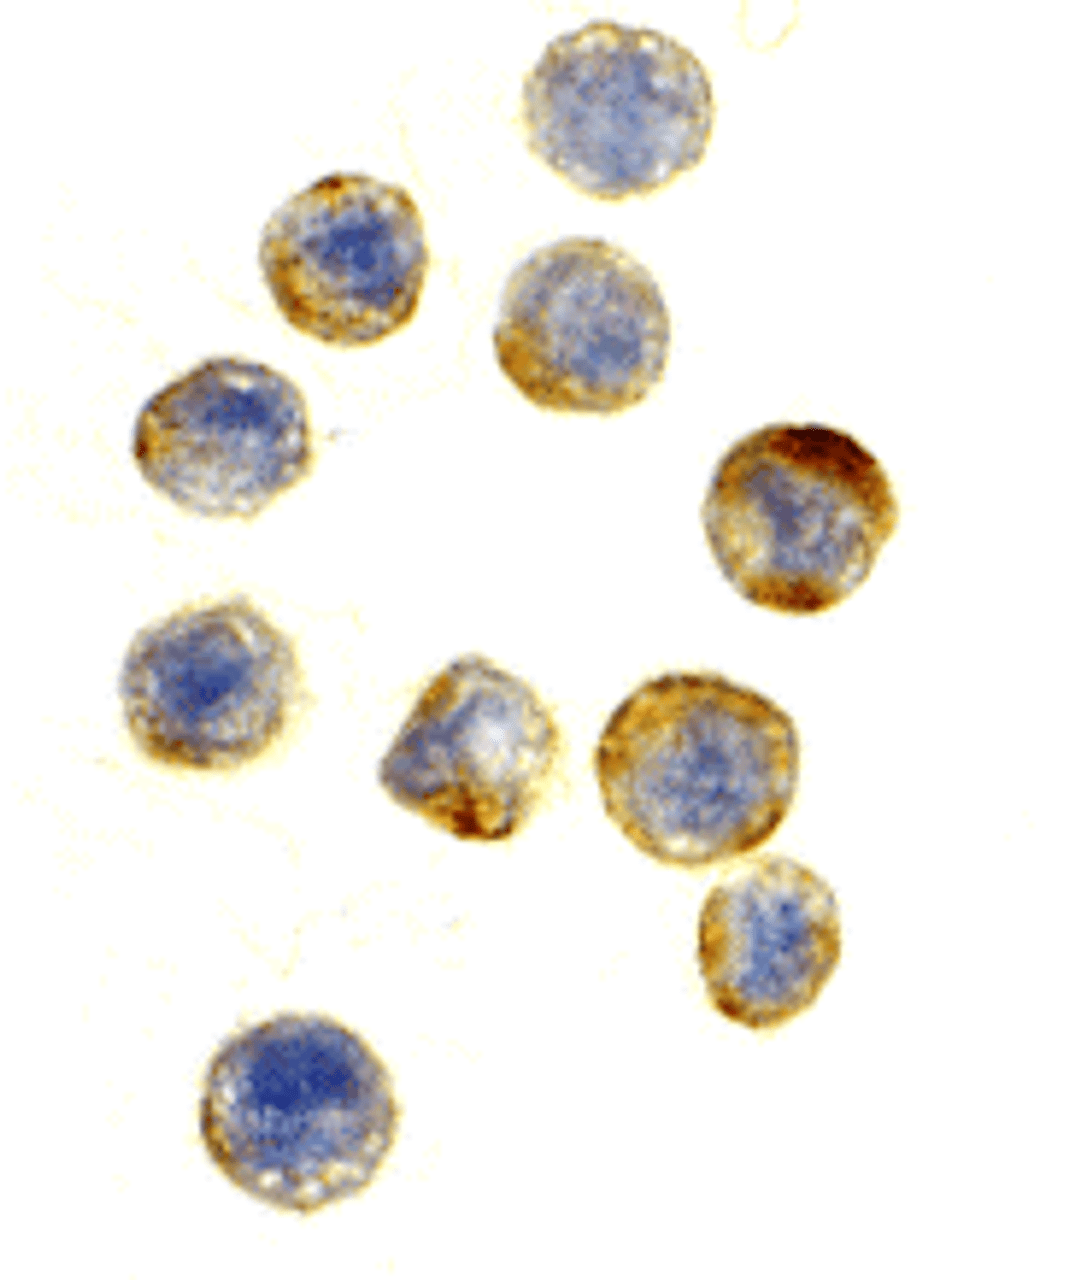 Immunohistochemical staining of GAPDH in HeLa cells at a dilution of 10 ug/mL.